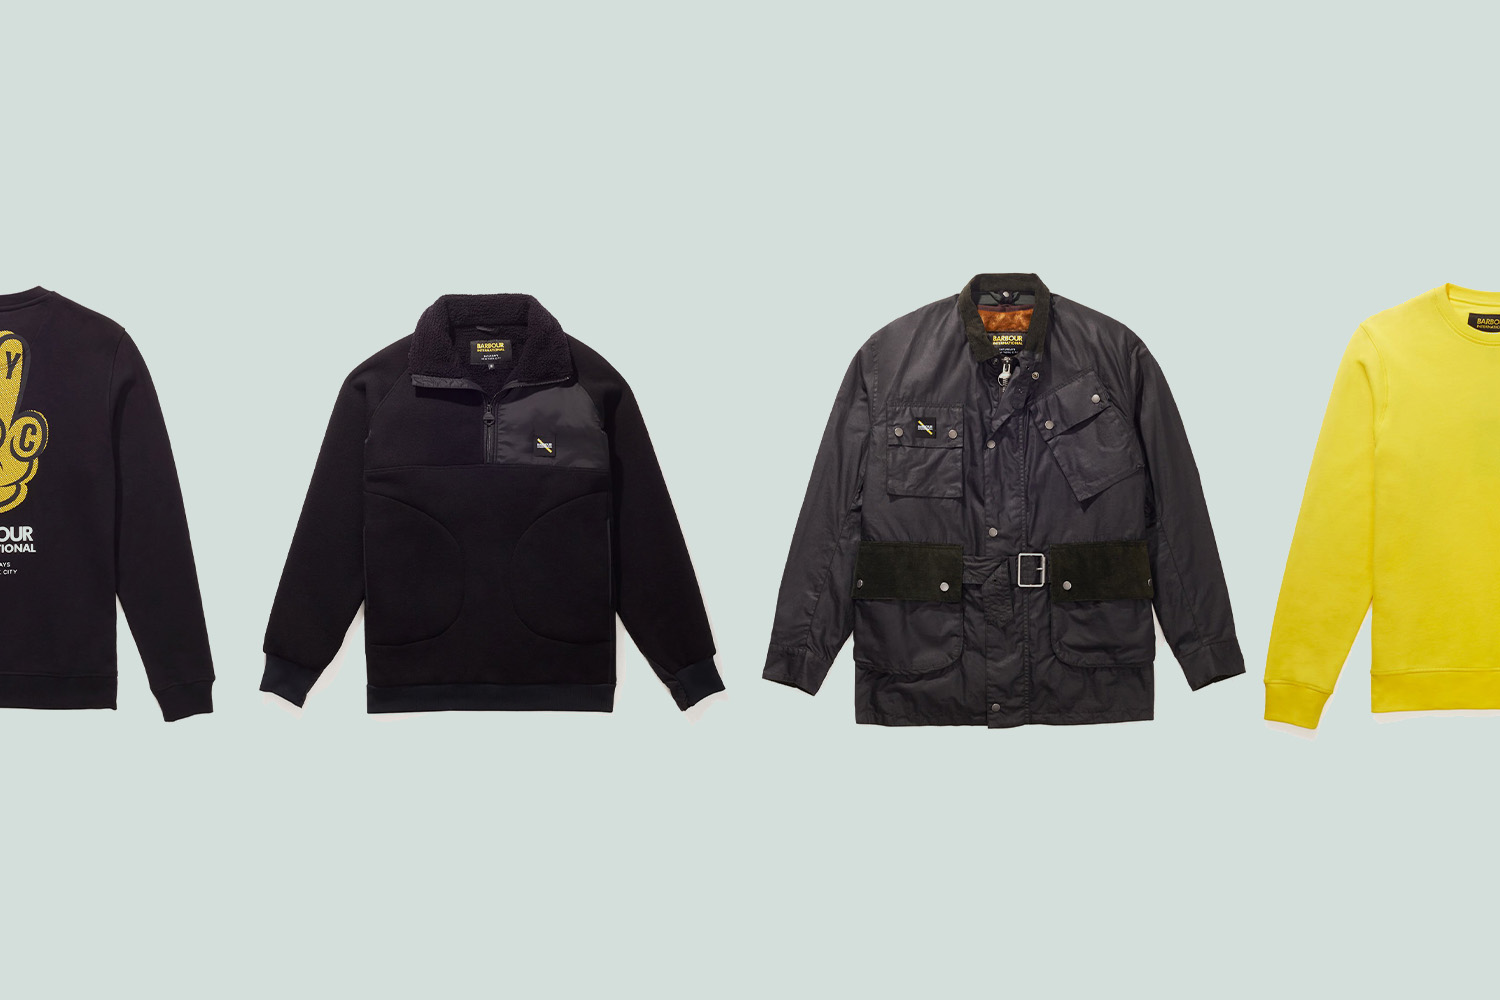 This Barbour x Saturdays Collab Brings Together Motorcycling and Surf Culture